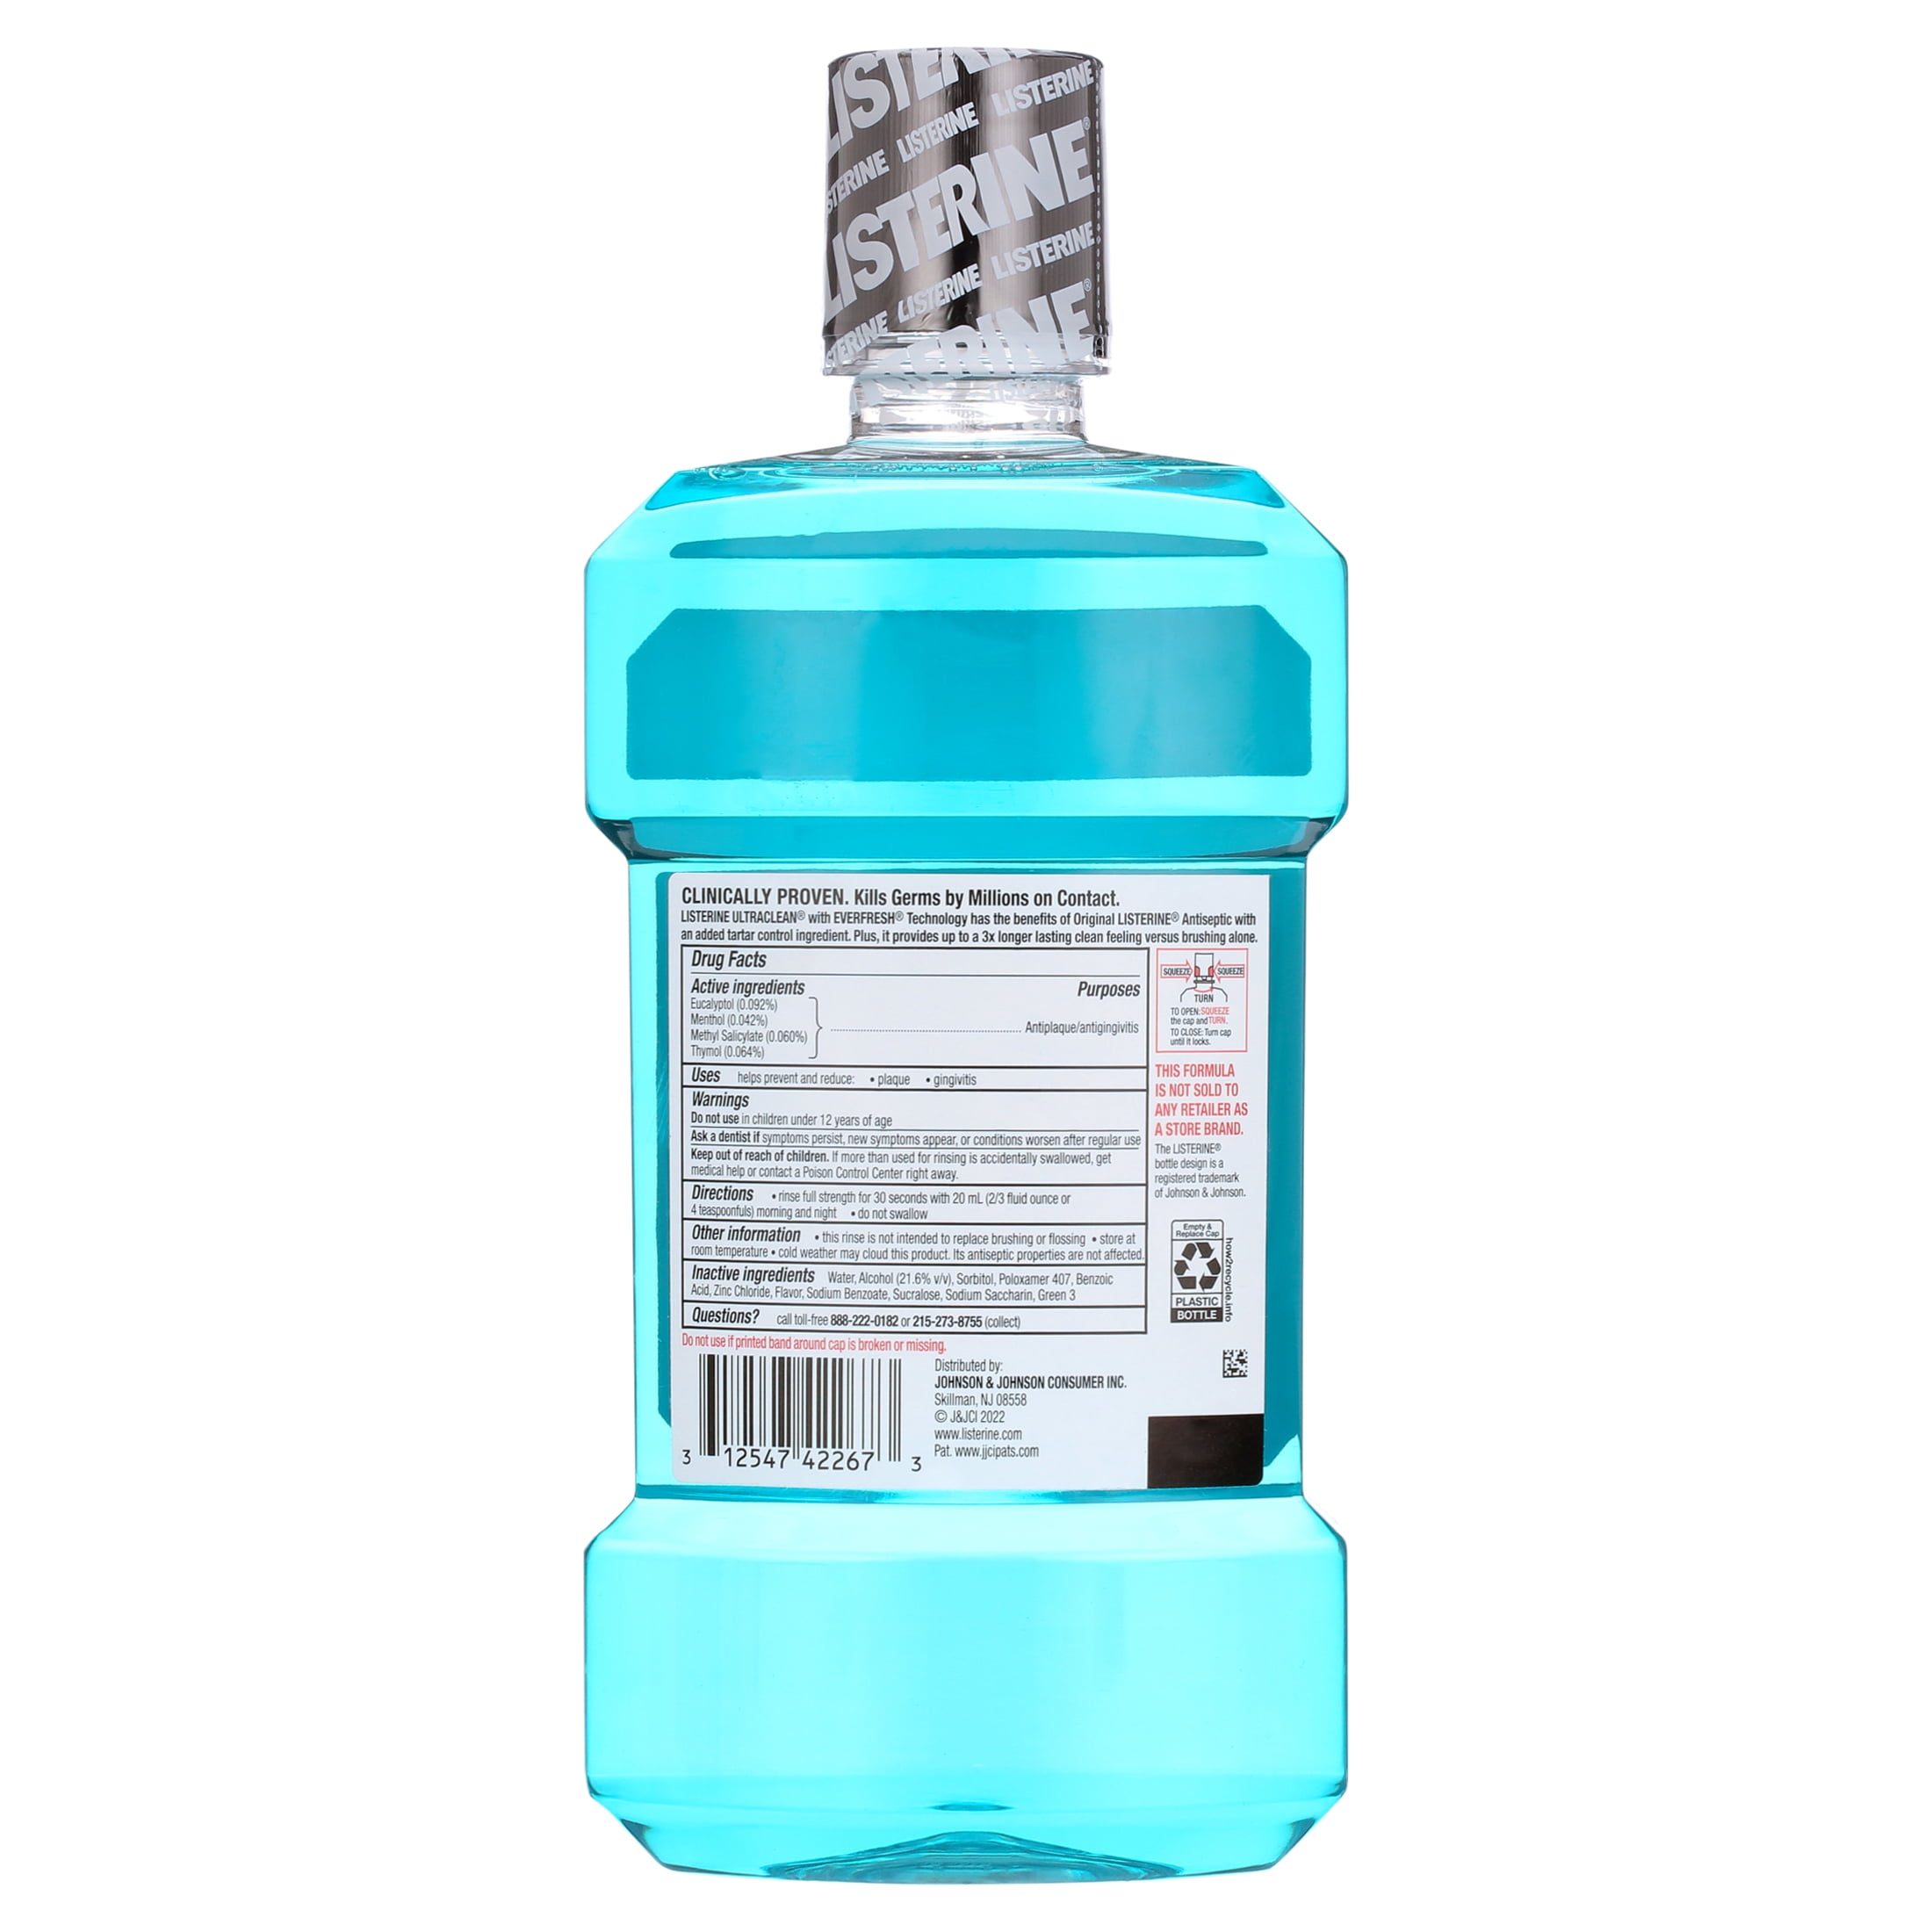 Listerine Ultra Clean Antiseptic Gingivitis Mouthwash Cool Mint